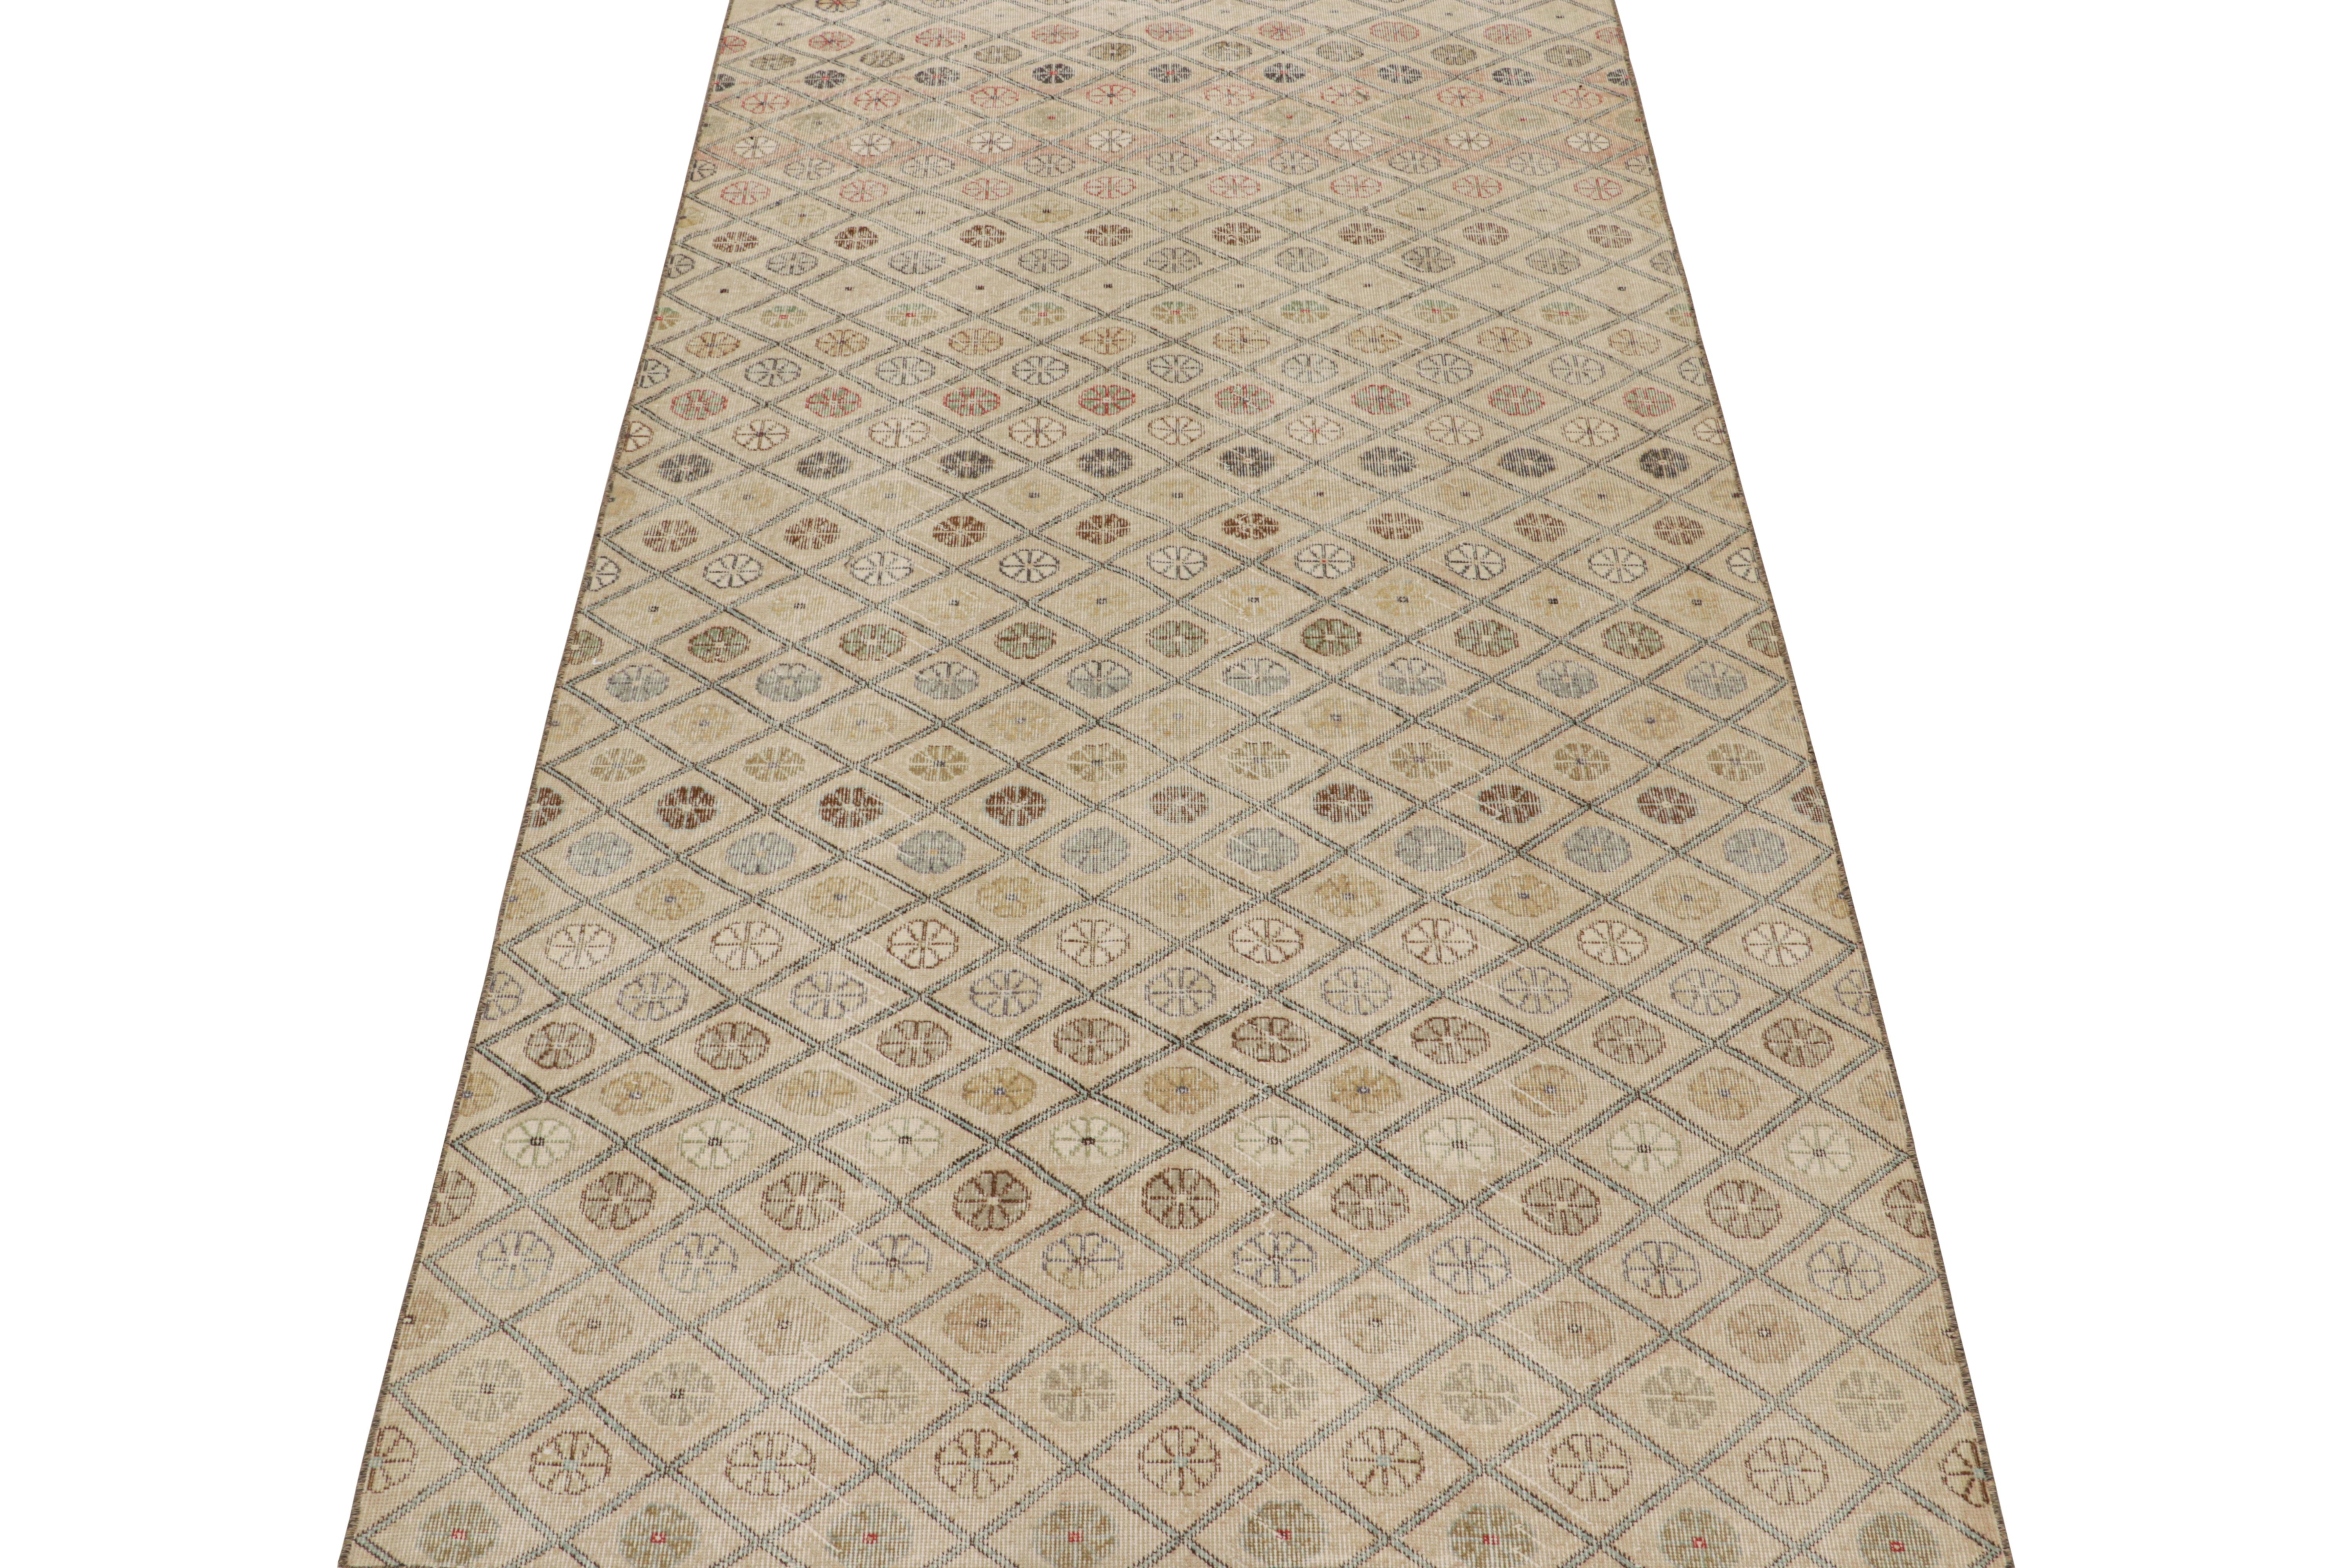 This vintage 6x11 rug is a new, rare addition to Rug & Kilim’s midcentury Pasha Collection. This line is a commemoration, with rare curations we believe to hail from multidisciplinary Turkish designer Zeki Müren. 

Further on the Design:

This